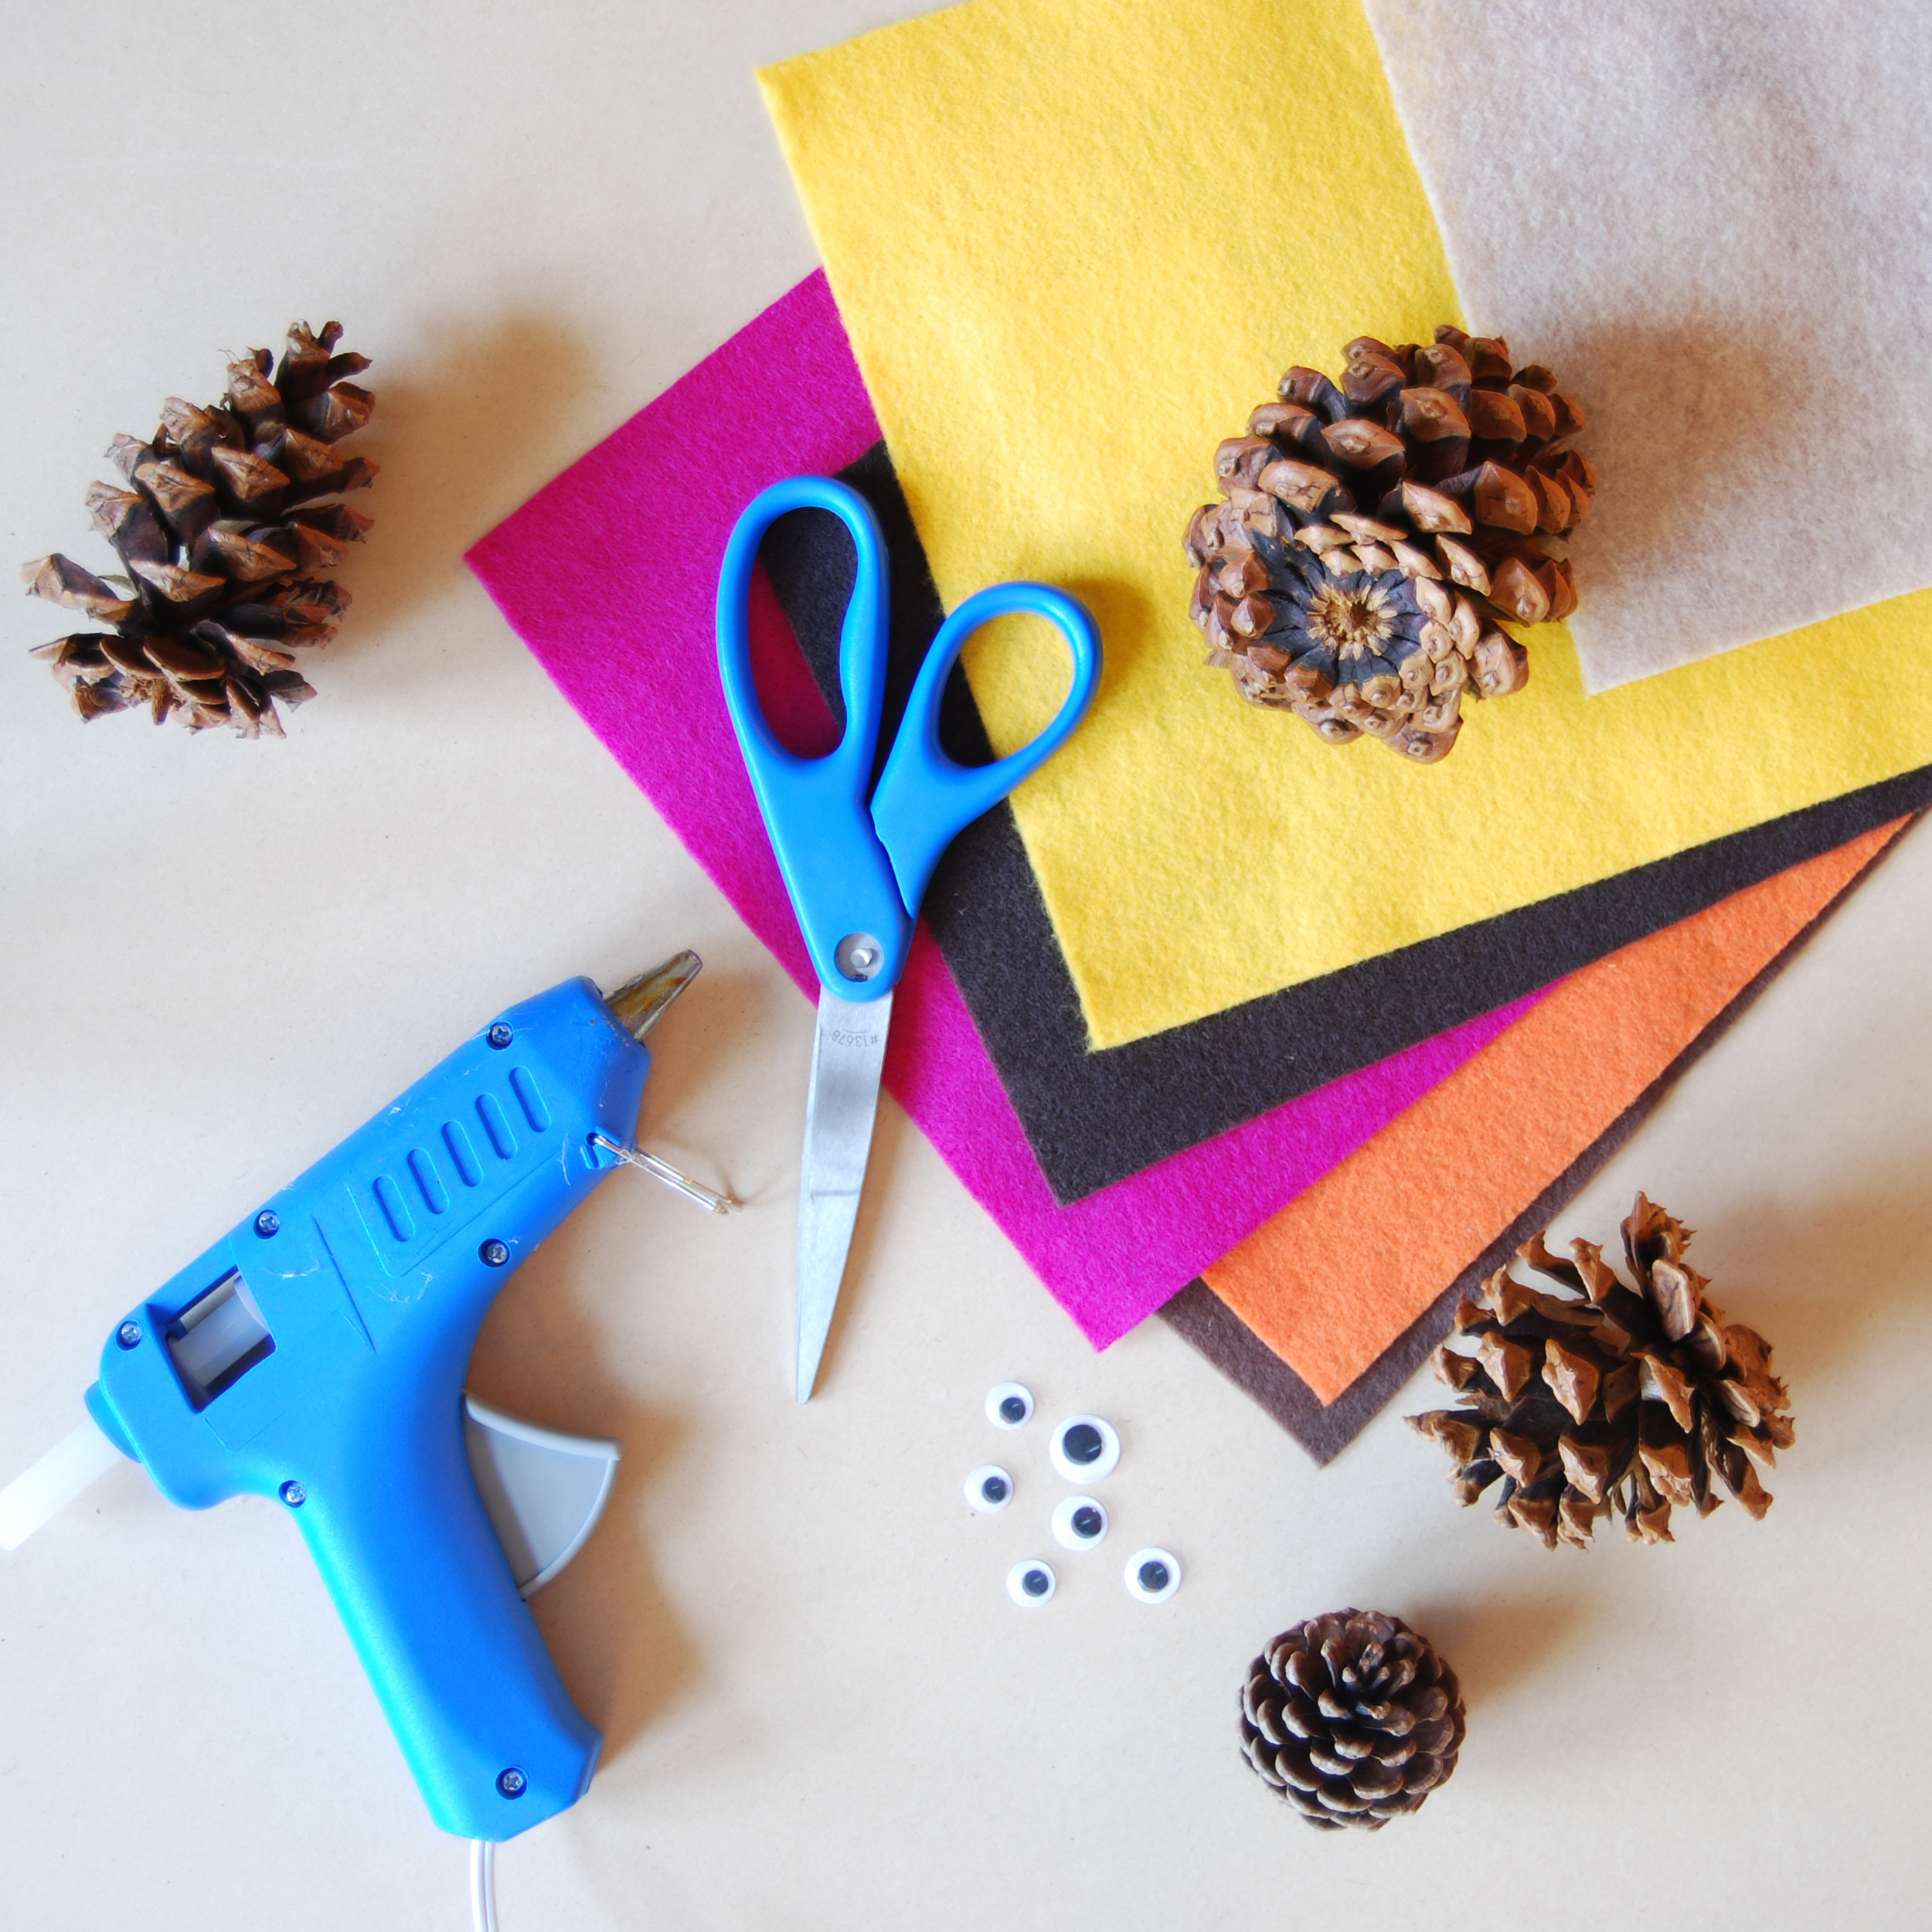 40 awesome pinecone crafts and projects - A girl and a glue gun